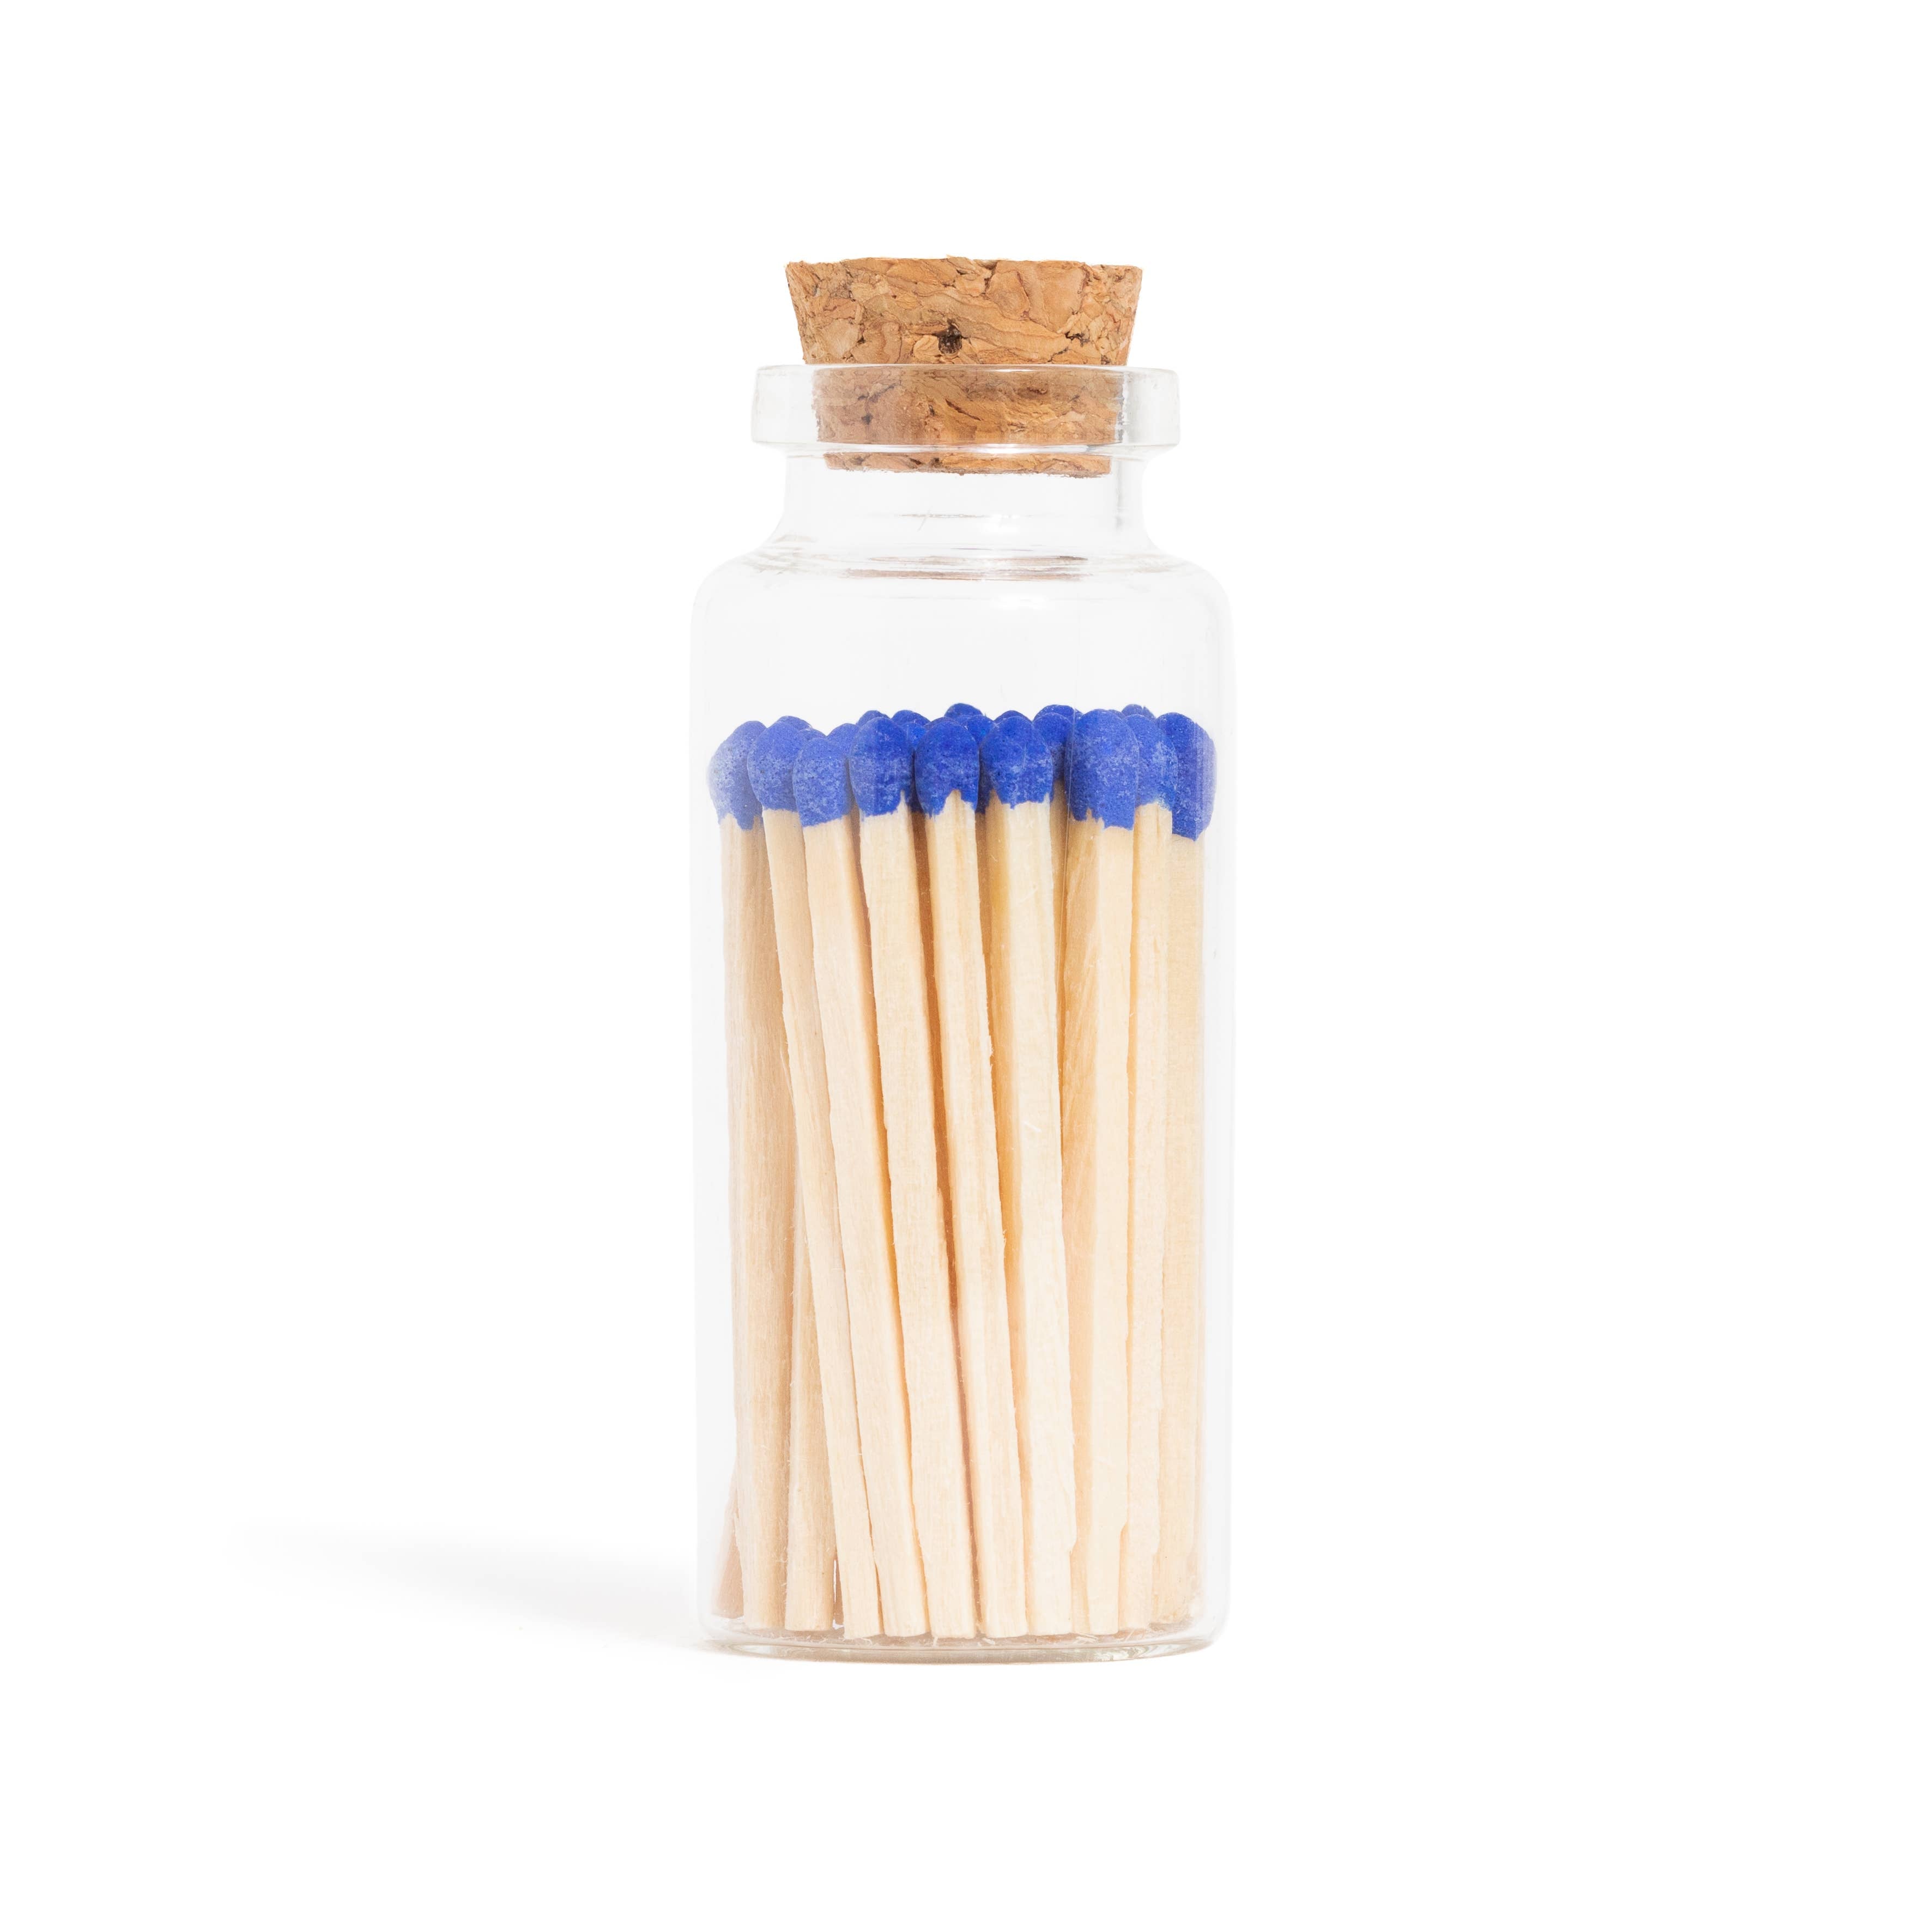 Royal Blue Matches in Medium Corked Vial